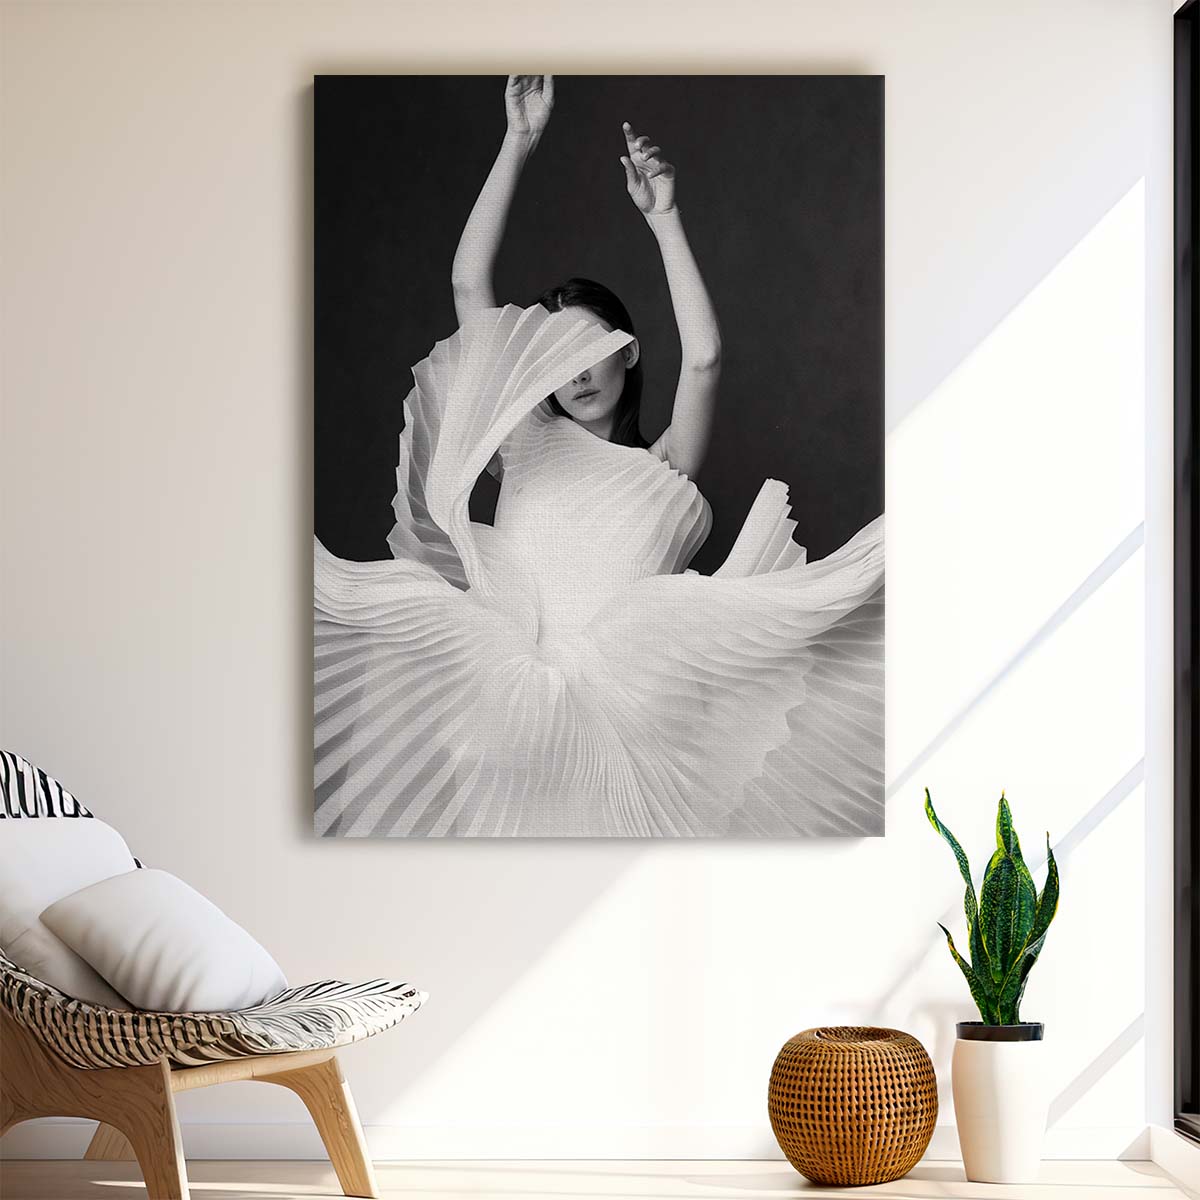 Monochrome Fashion Model Photography Anonymous Dancing Woman Portrait by Luxuriance Designs, made in USA